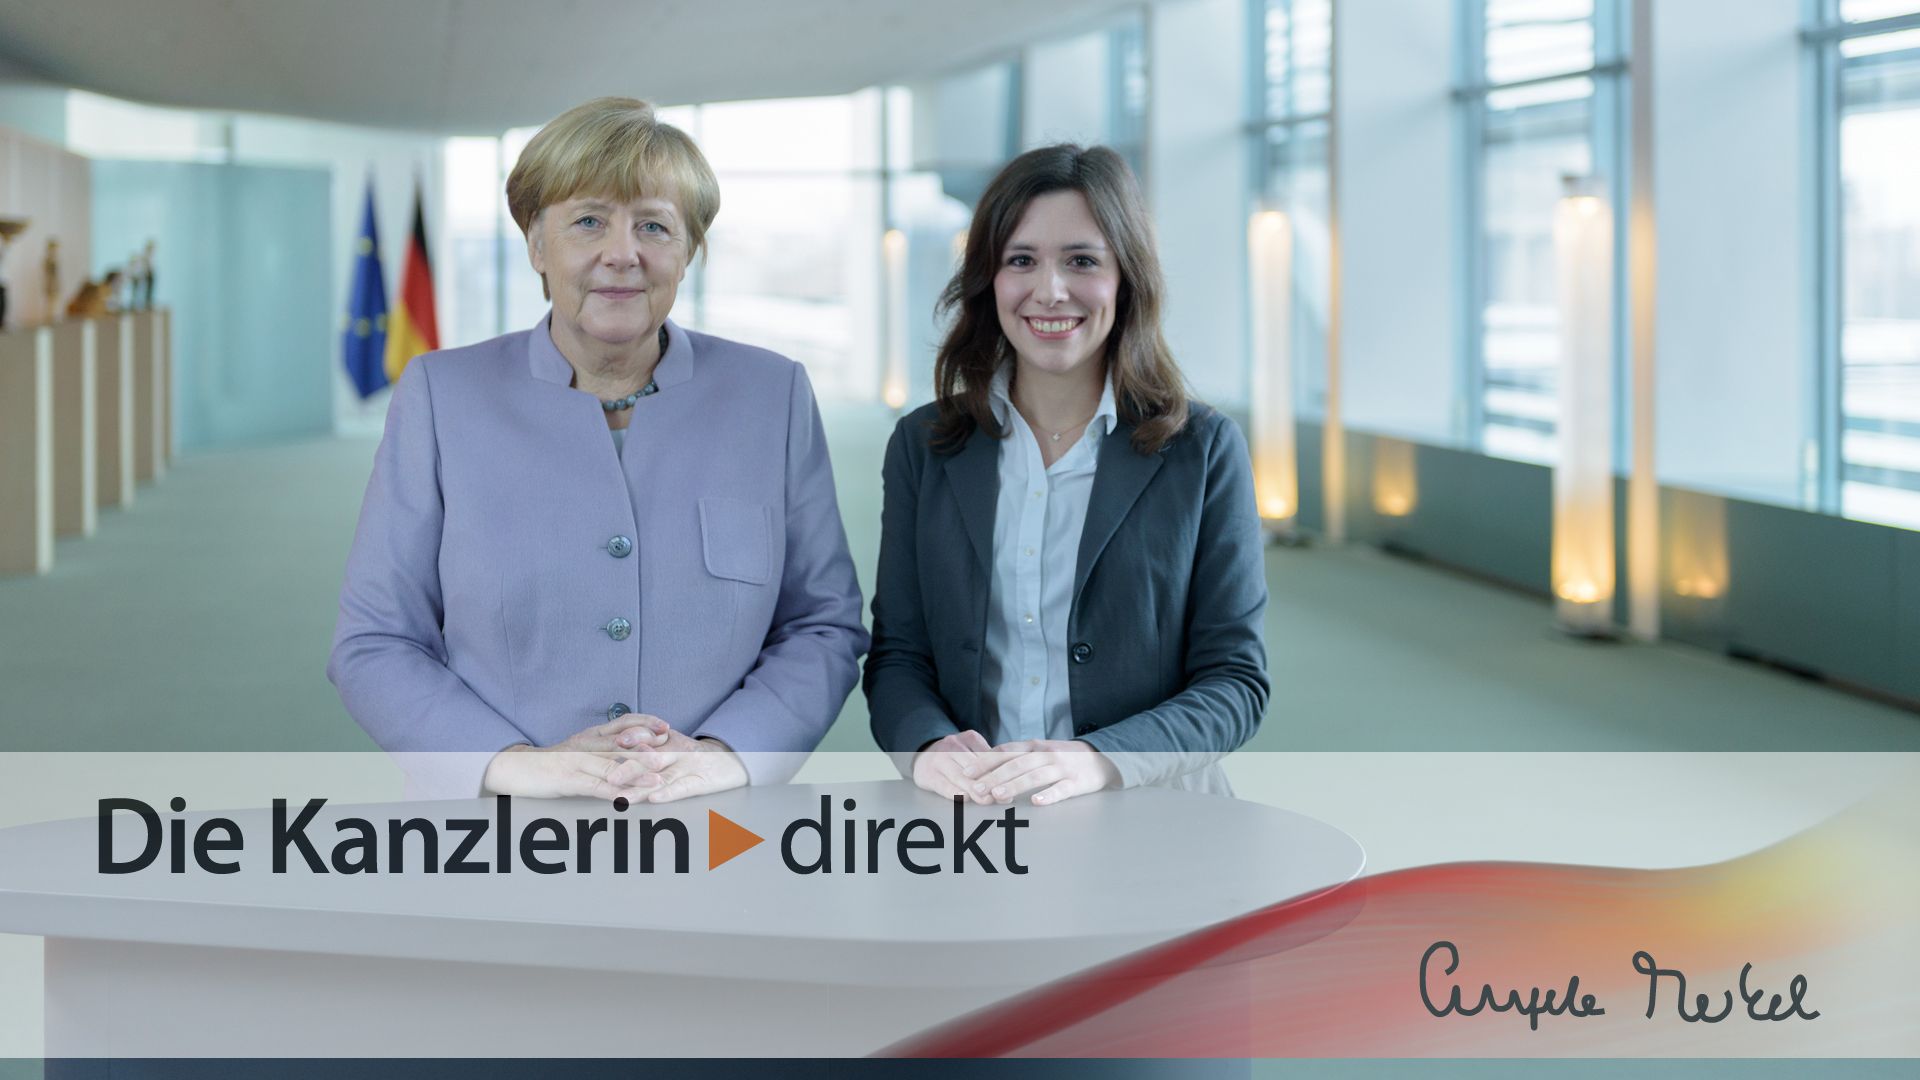 Chancellor Merkel and the interview partner